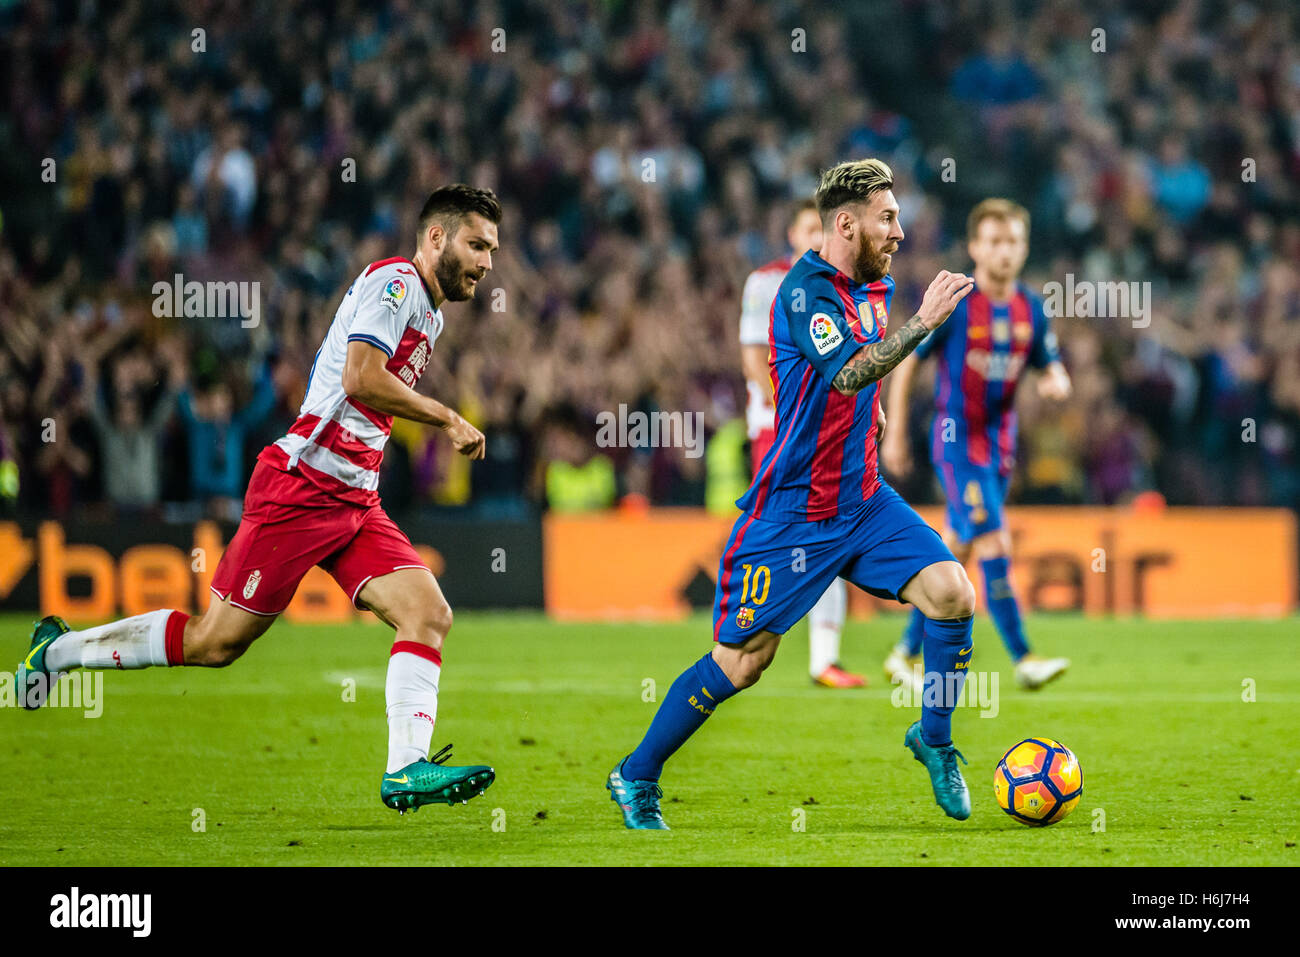 Barcelona, Catalonia, Spain. 29th Oct, 2016. FC Barcelona forward MESSI in action during the LaLiga match between FC Barcelona and Granada CF at the Camp Nou stadium in Barcelona © Matthias Oesterle/ZUMA Wire/Alamy Live News Stock Photo